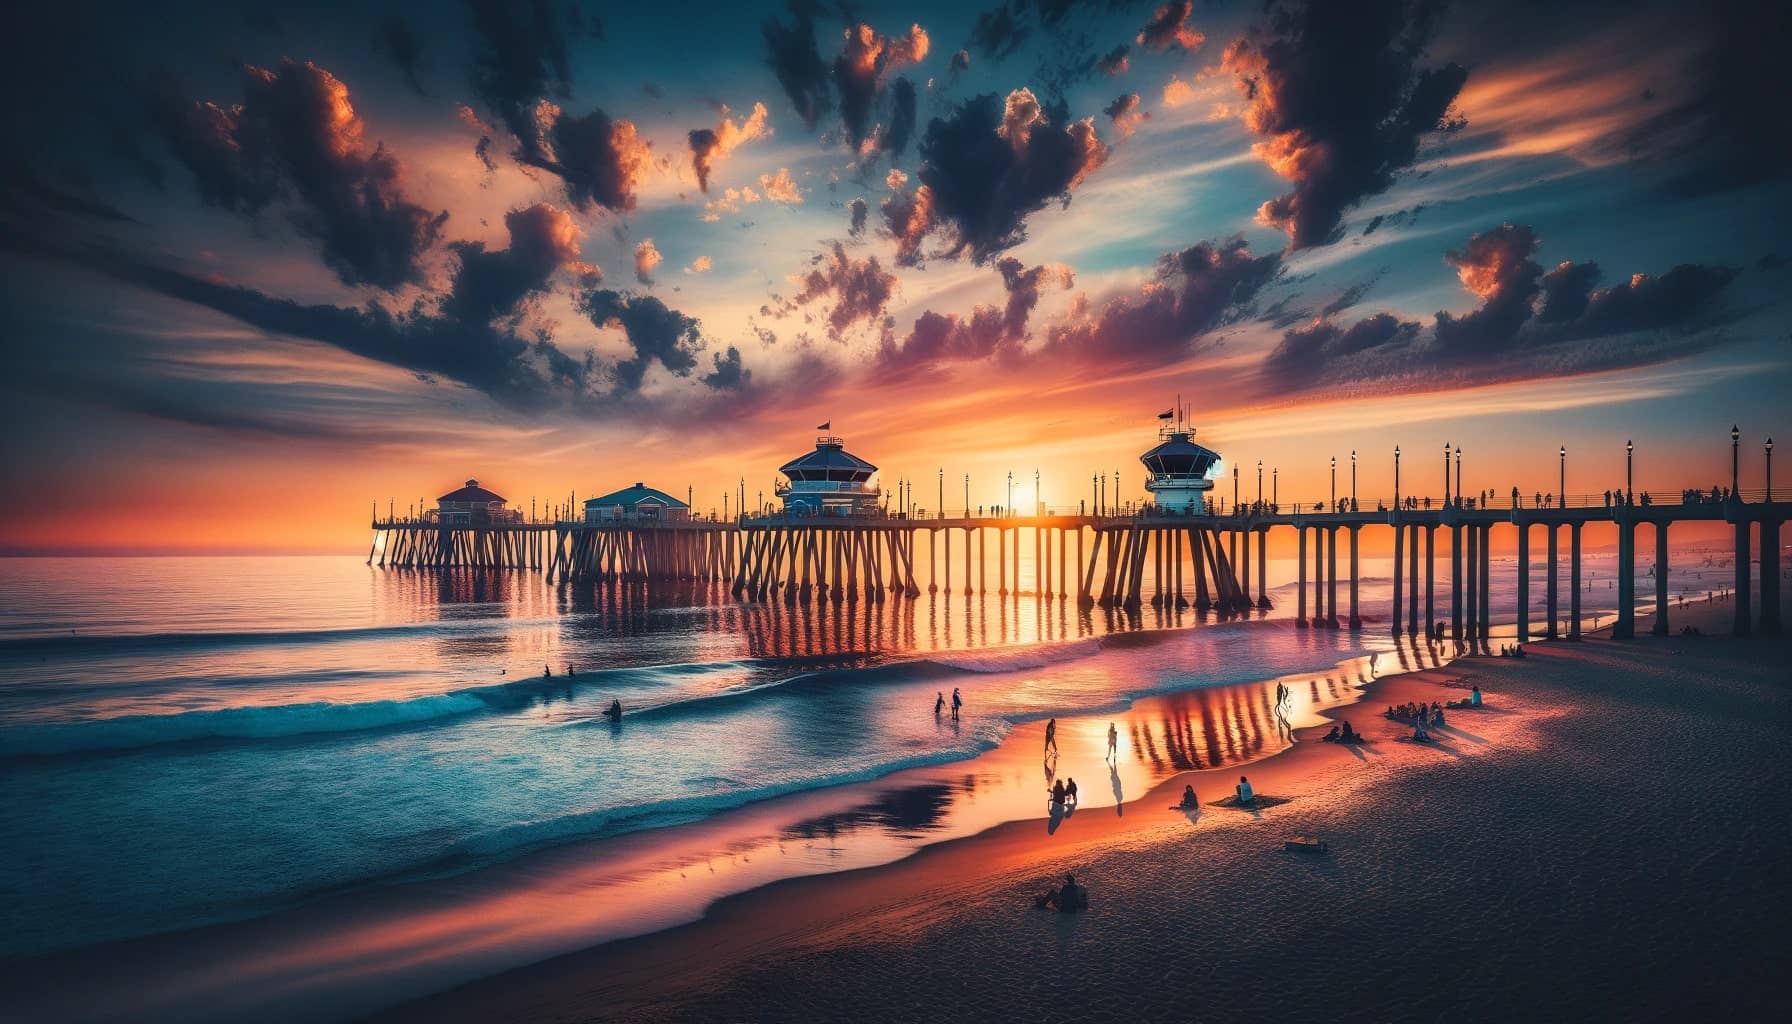 picturesque scene at Huntington Beach California during a tranquil sunset